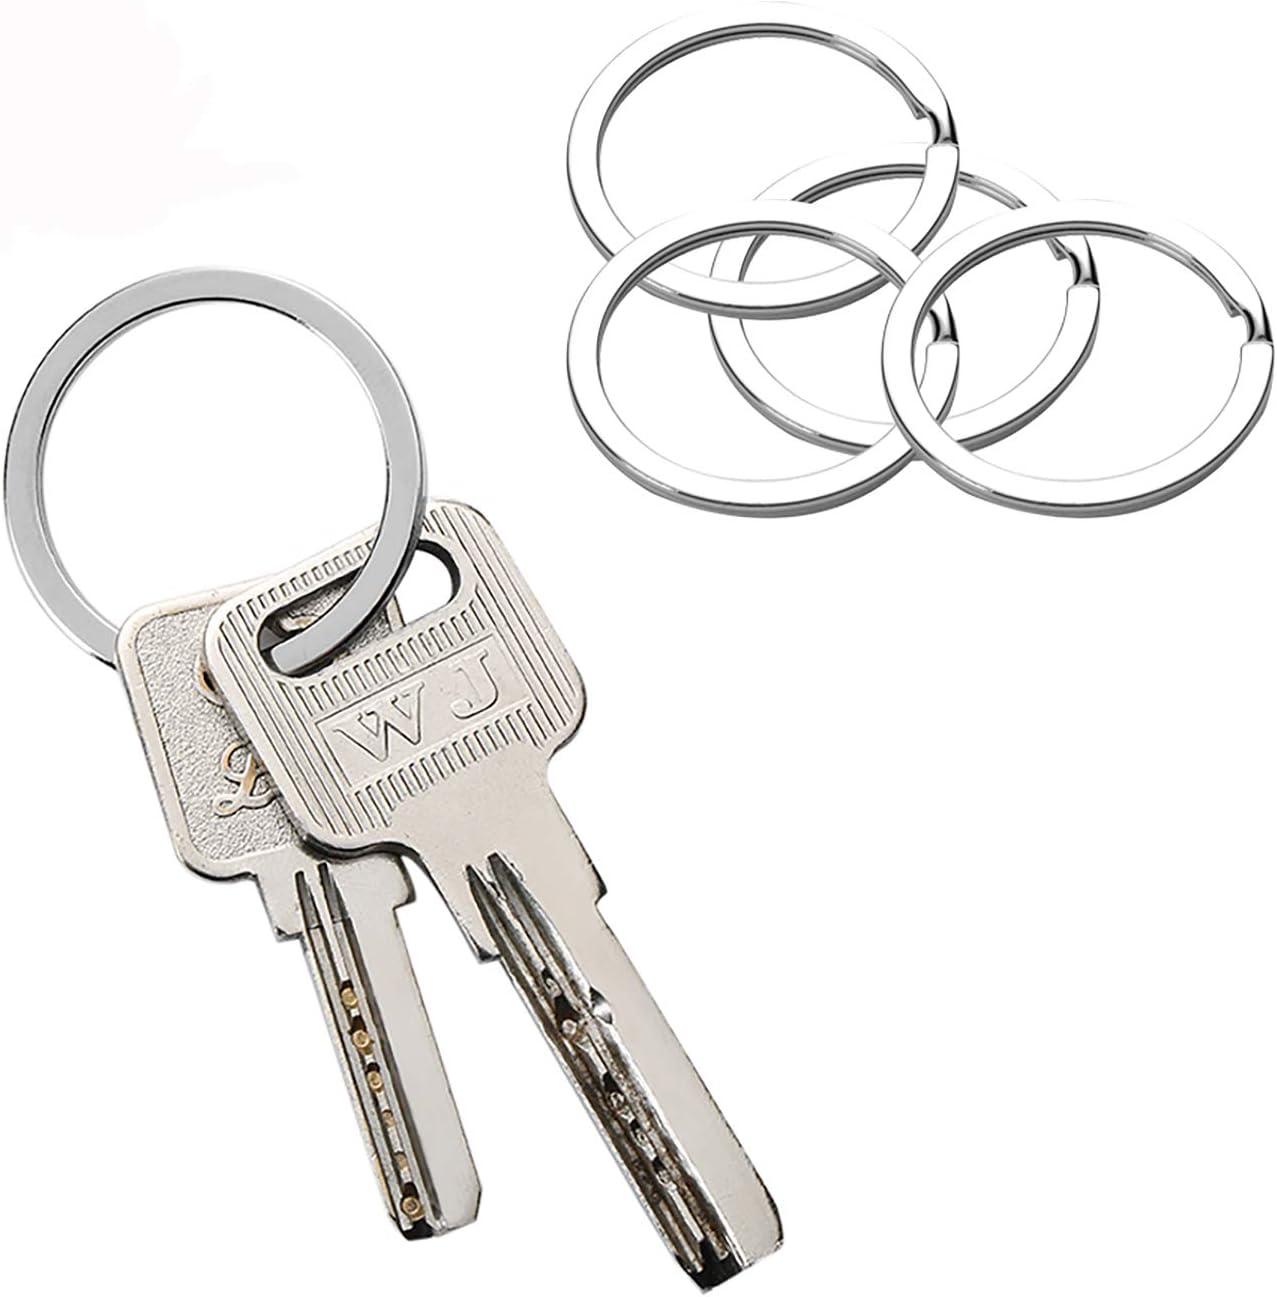 HeeYaa Flat Key Rings 50 Pieces 1 inches Flat Key Rings Metal Keychain  Rings Split Keyrings Flat O Ring for Home Car Office Keys Attachment(Silver)